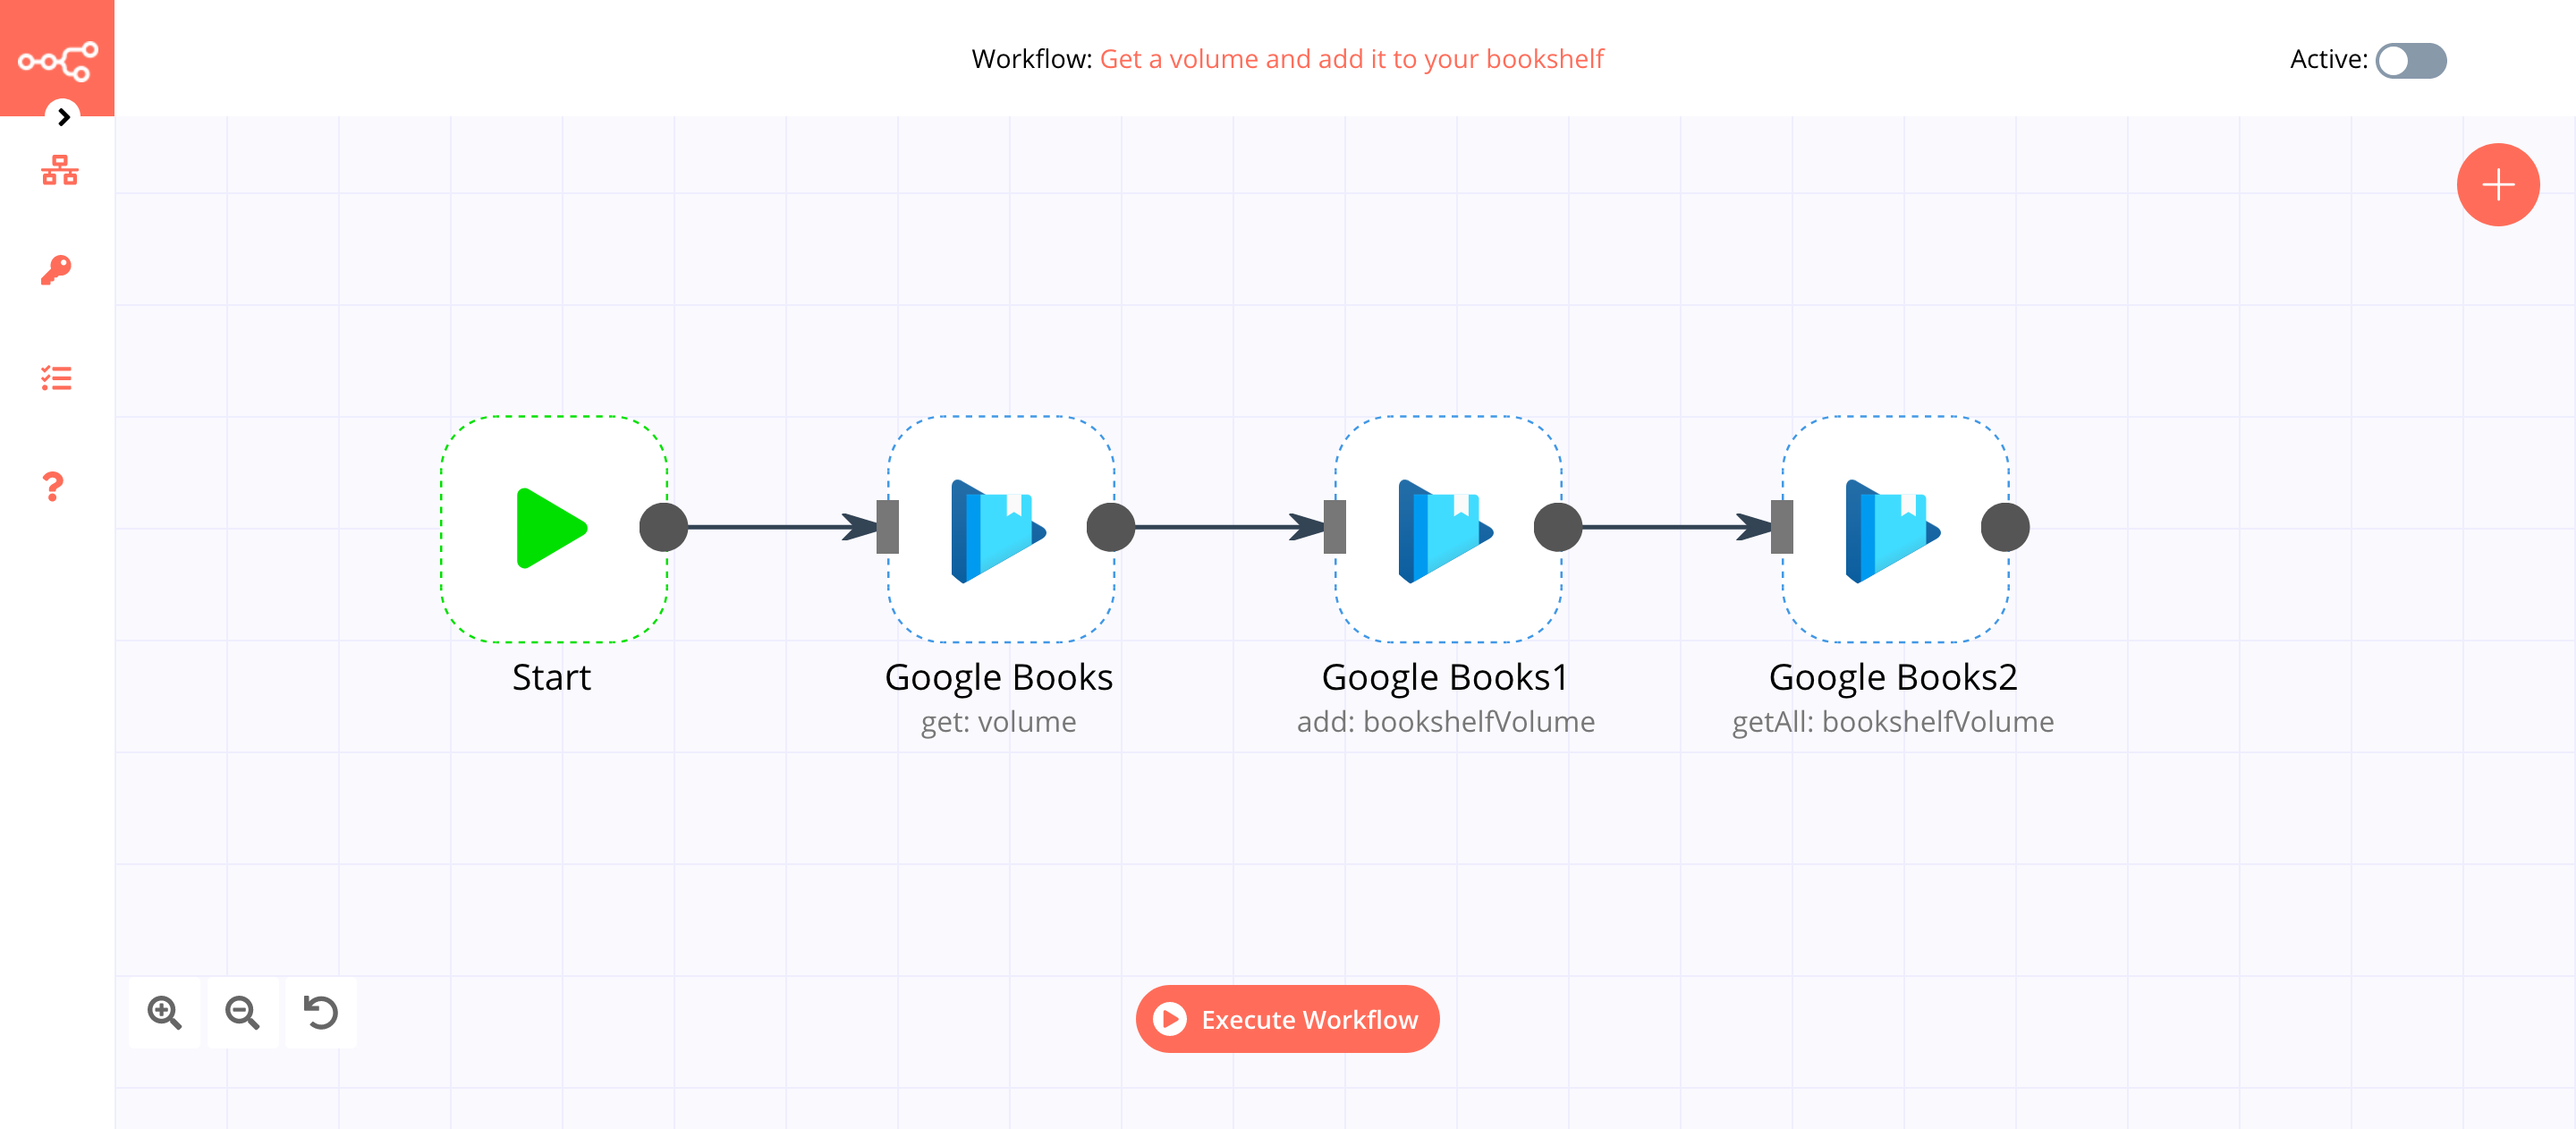 A workflow with the Google Books node